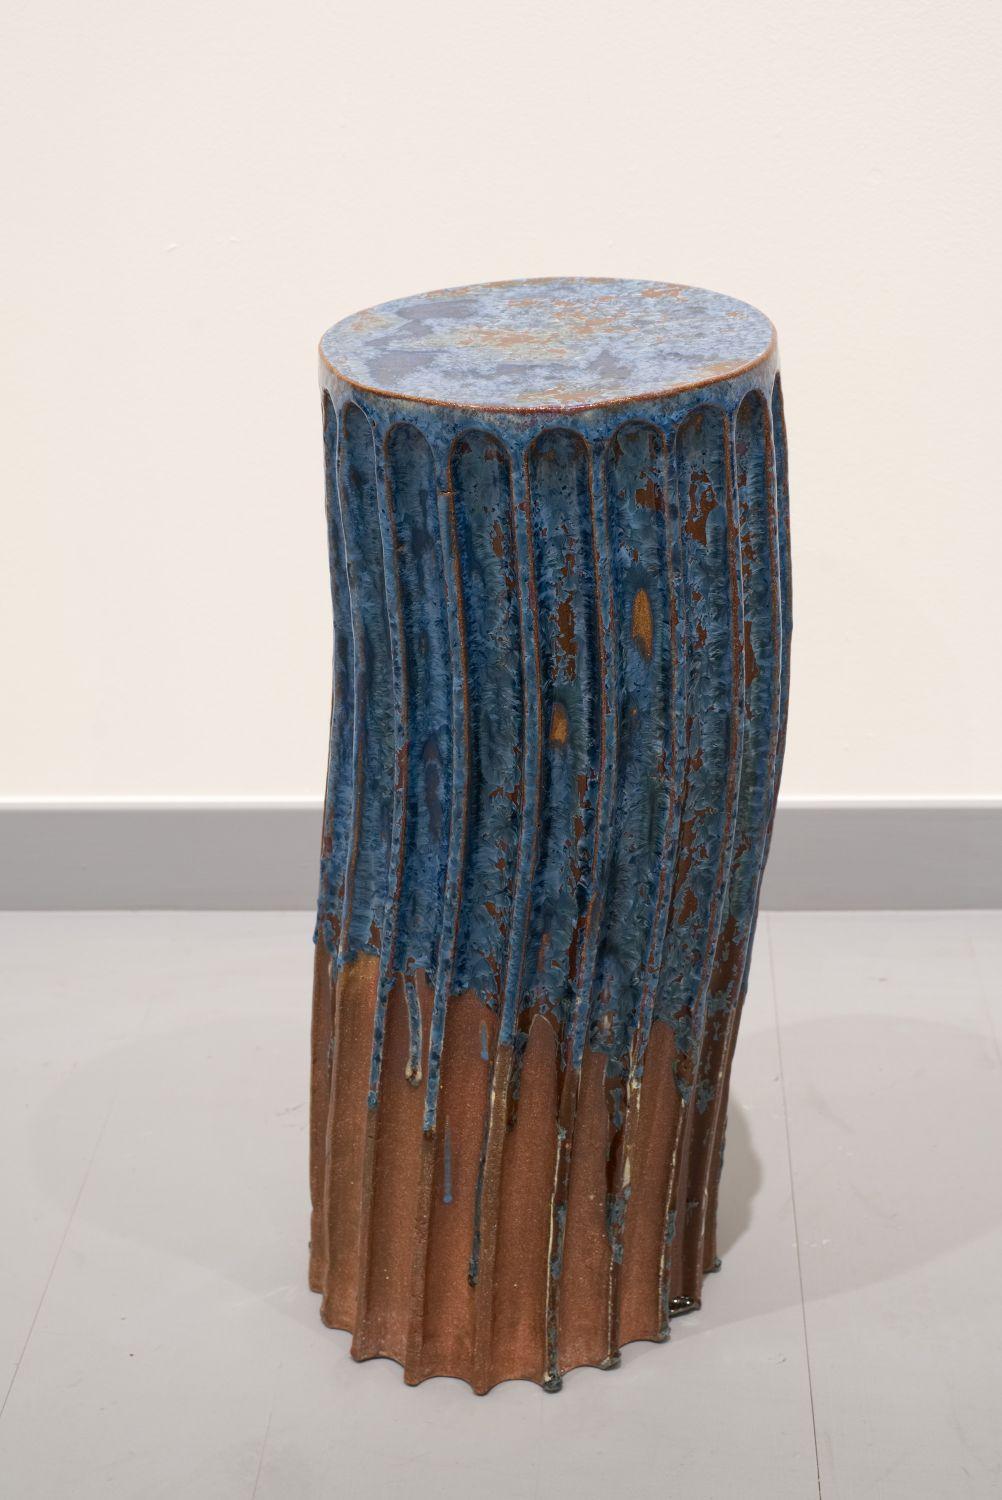 Pillar stool - Blue -Tall by Milan Pekar
Dimensions: D22 x H52 cm
Materials: Glaze, Clay

Hand-crafted in the Czech Republic

Also Available: different colors, heights and patterns

Established own studio August 2009 – Focus mainly on